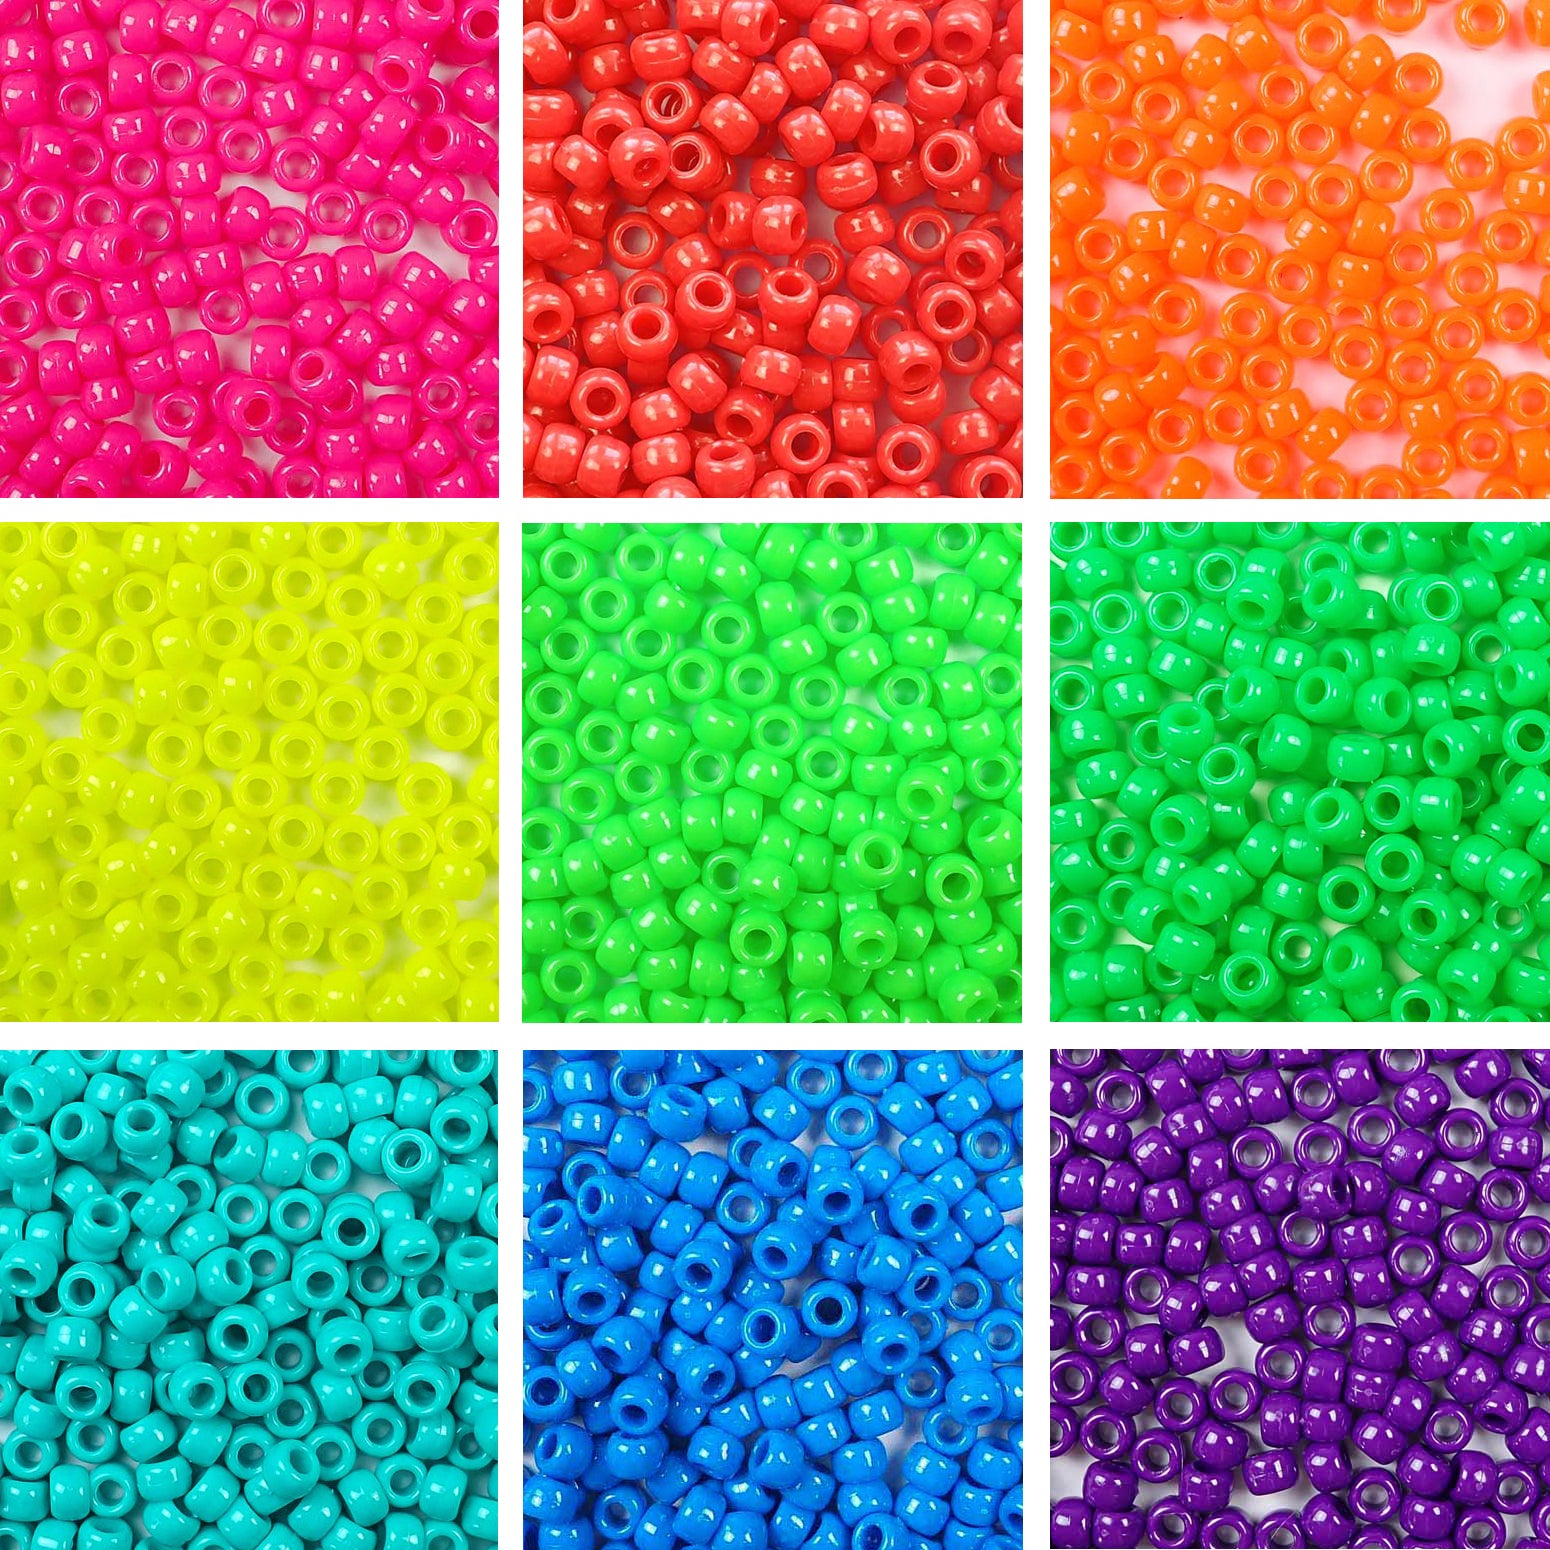 Neon 6 x 9mm Pony Bead Variety Pack - 9 Colors (4500 beads total)